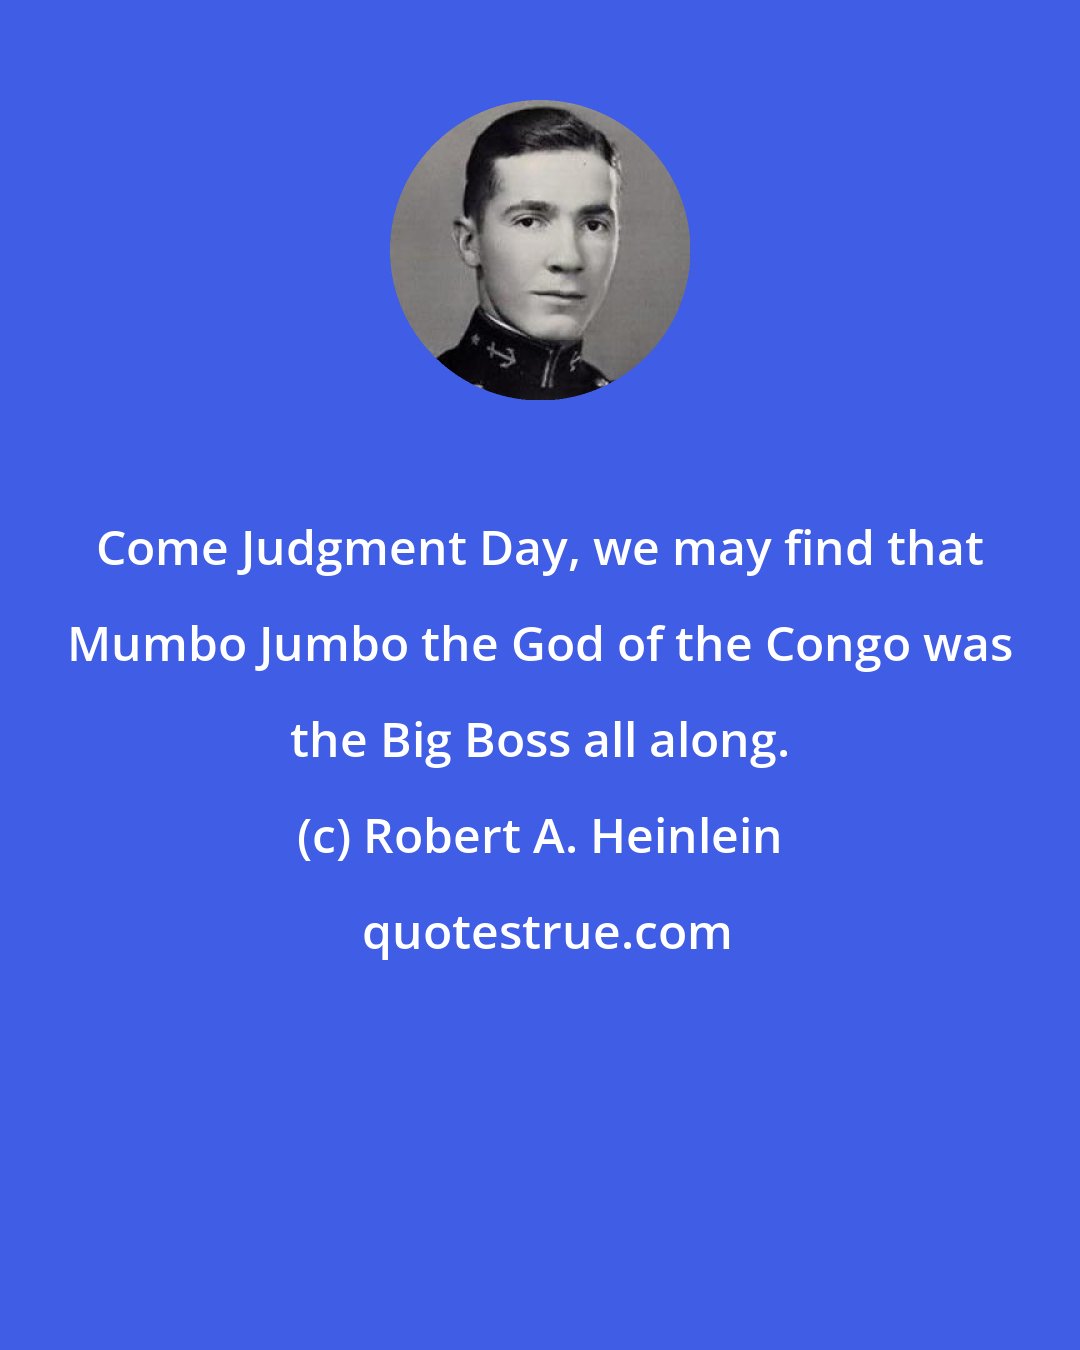 Robert A. Heinlein: Come Judgment Day, we may find that Mumbo Jumbo the God of the Congo was the Big Boss all along.